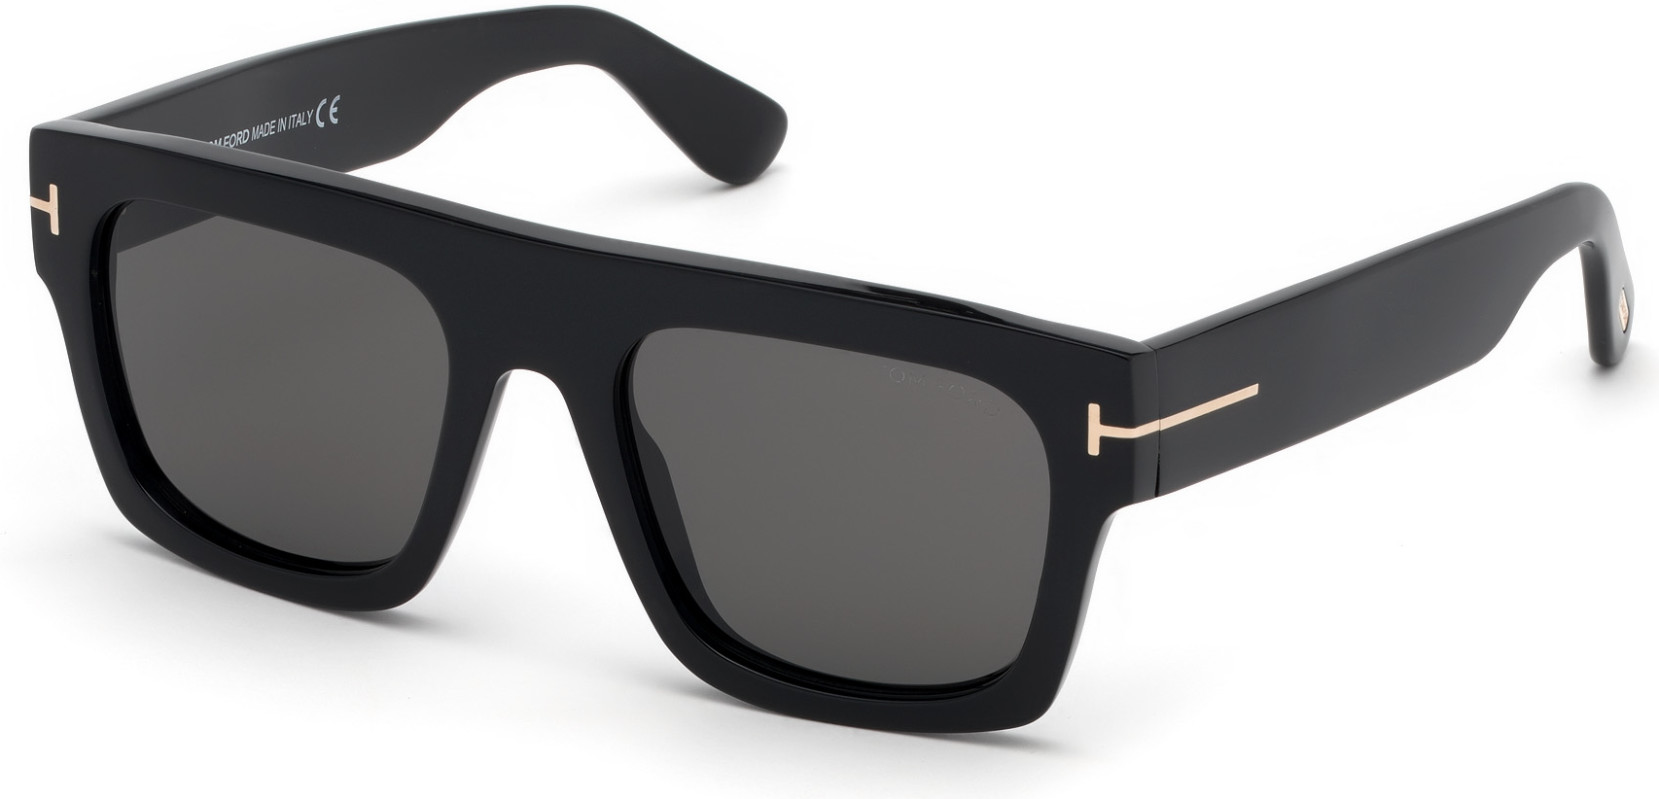 TOM FORD 0711 FAUSTO